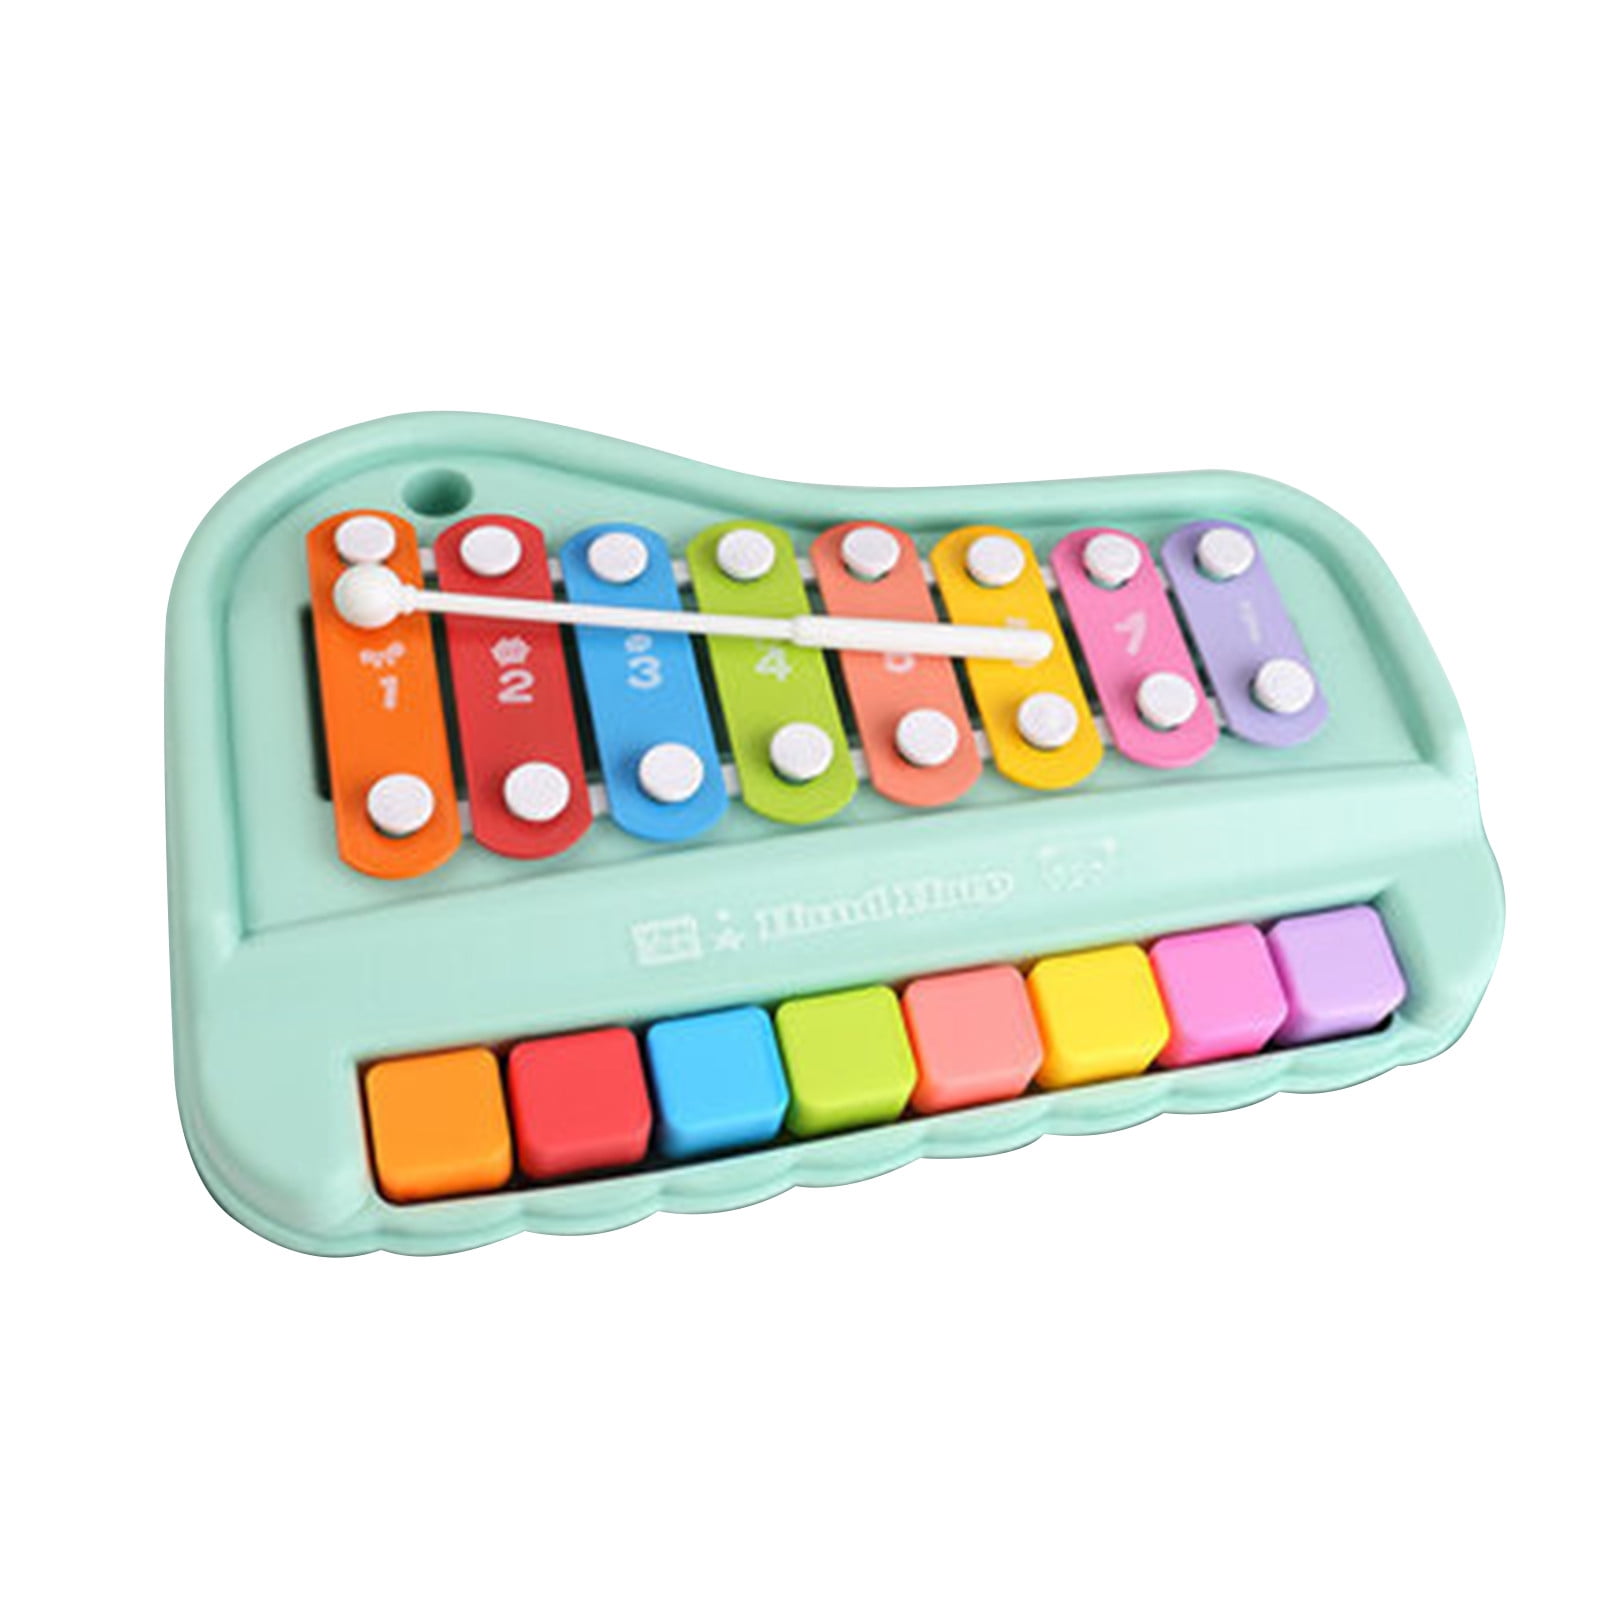 Feltree Education Toys Clearance 2 In 1 Baby Piano Xylophone Toy For  Toddlers 1-3 Years Old, 8 Multicolored Key Keyboard Xylophone Piano,  Preschool Educational Musical Learning Instruments Toy Green 